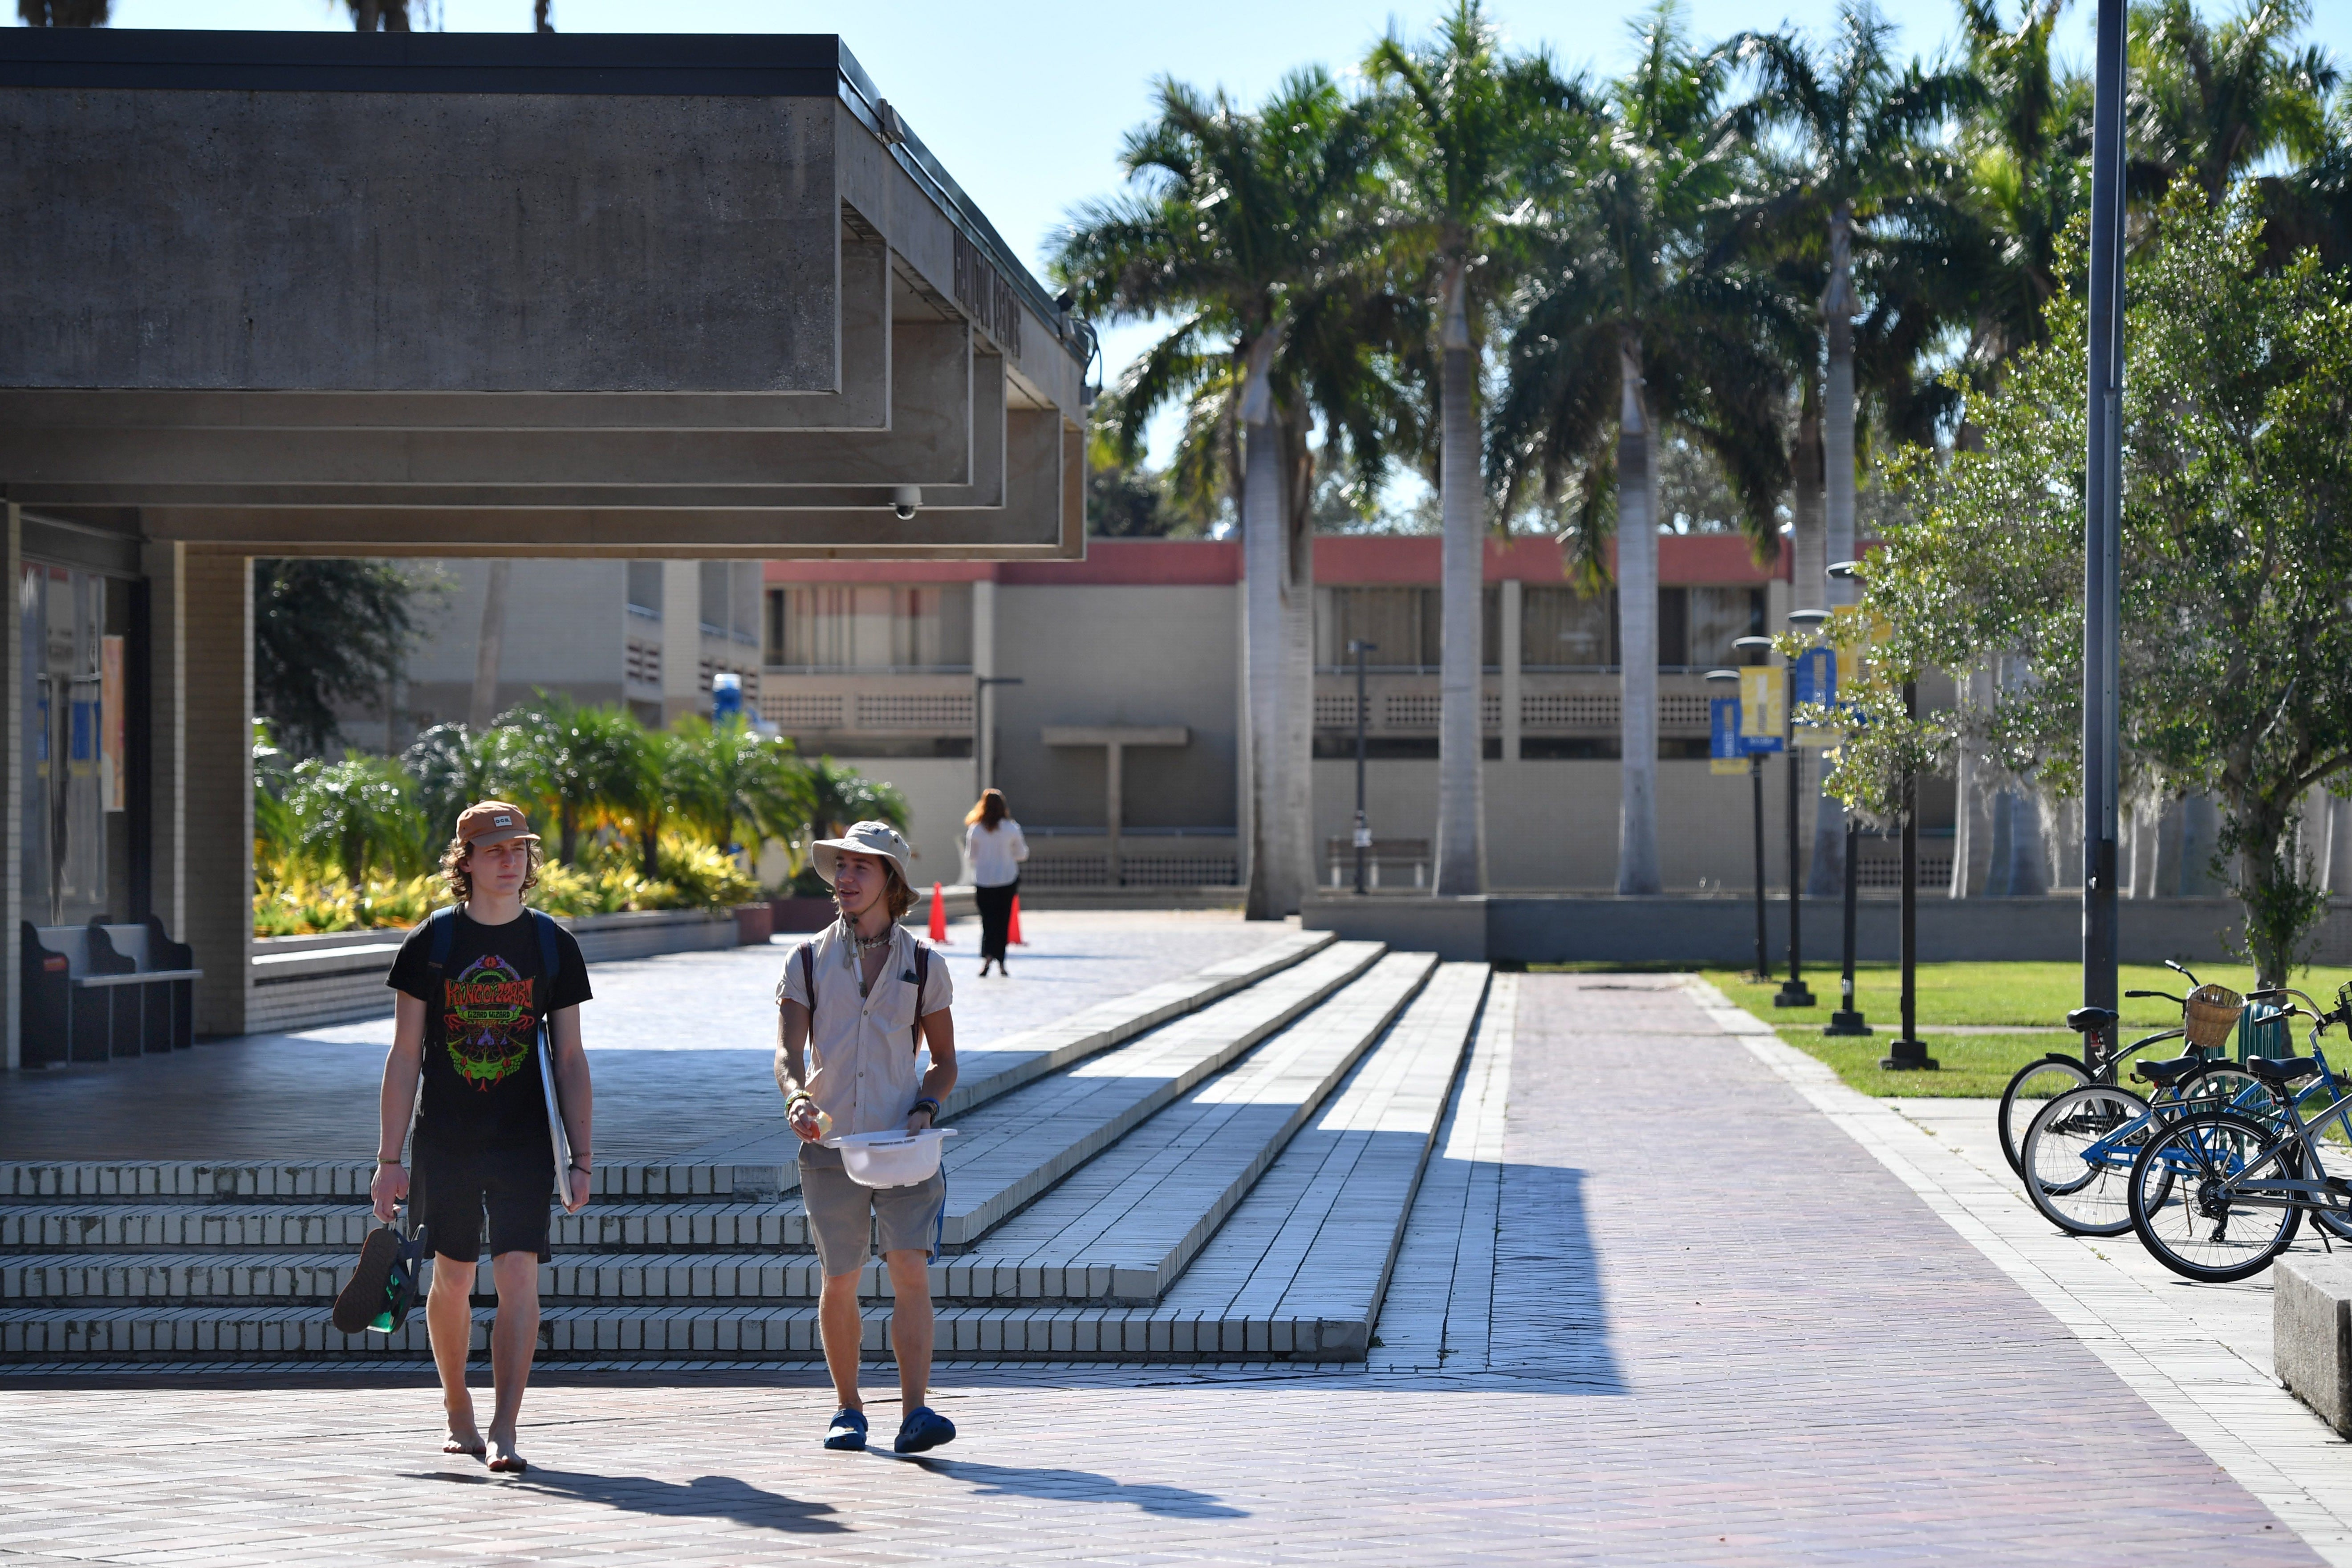 Two students in shorts walk near a brutalist-style building on a sunny day. A bike rack, another building, and palm trees are seen in the background.